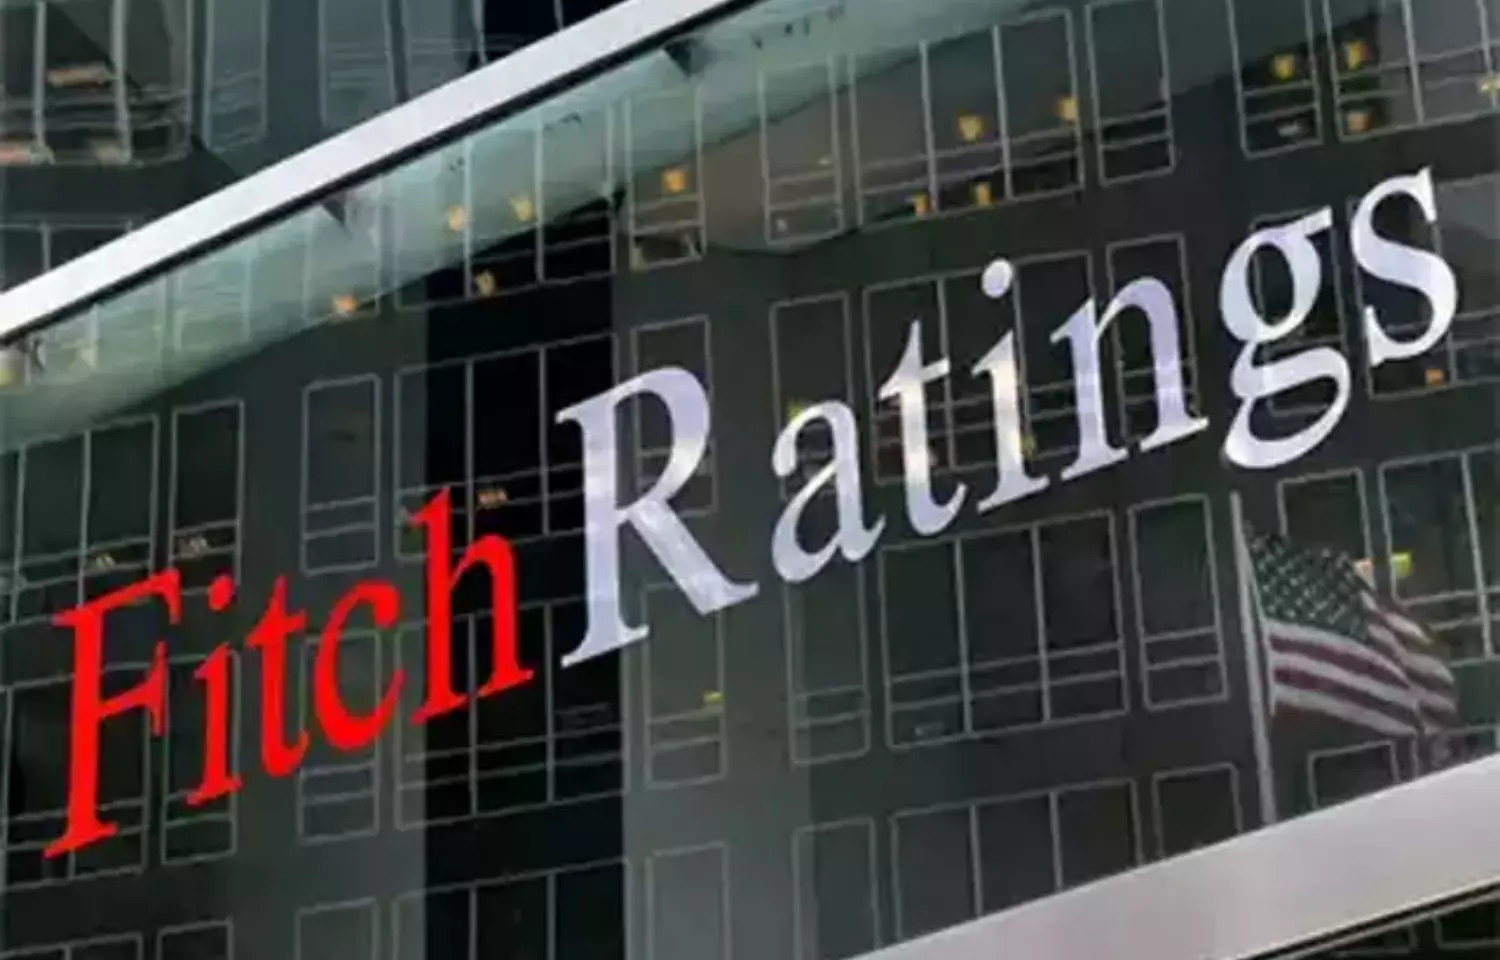 India to become hub for Covid-19 antiviral generic drugs: Fitch